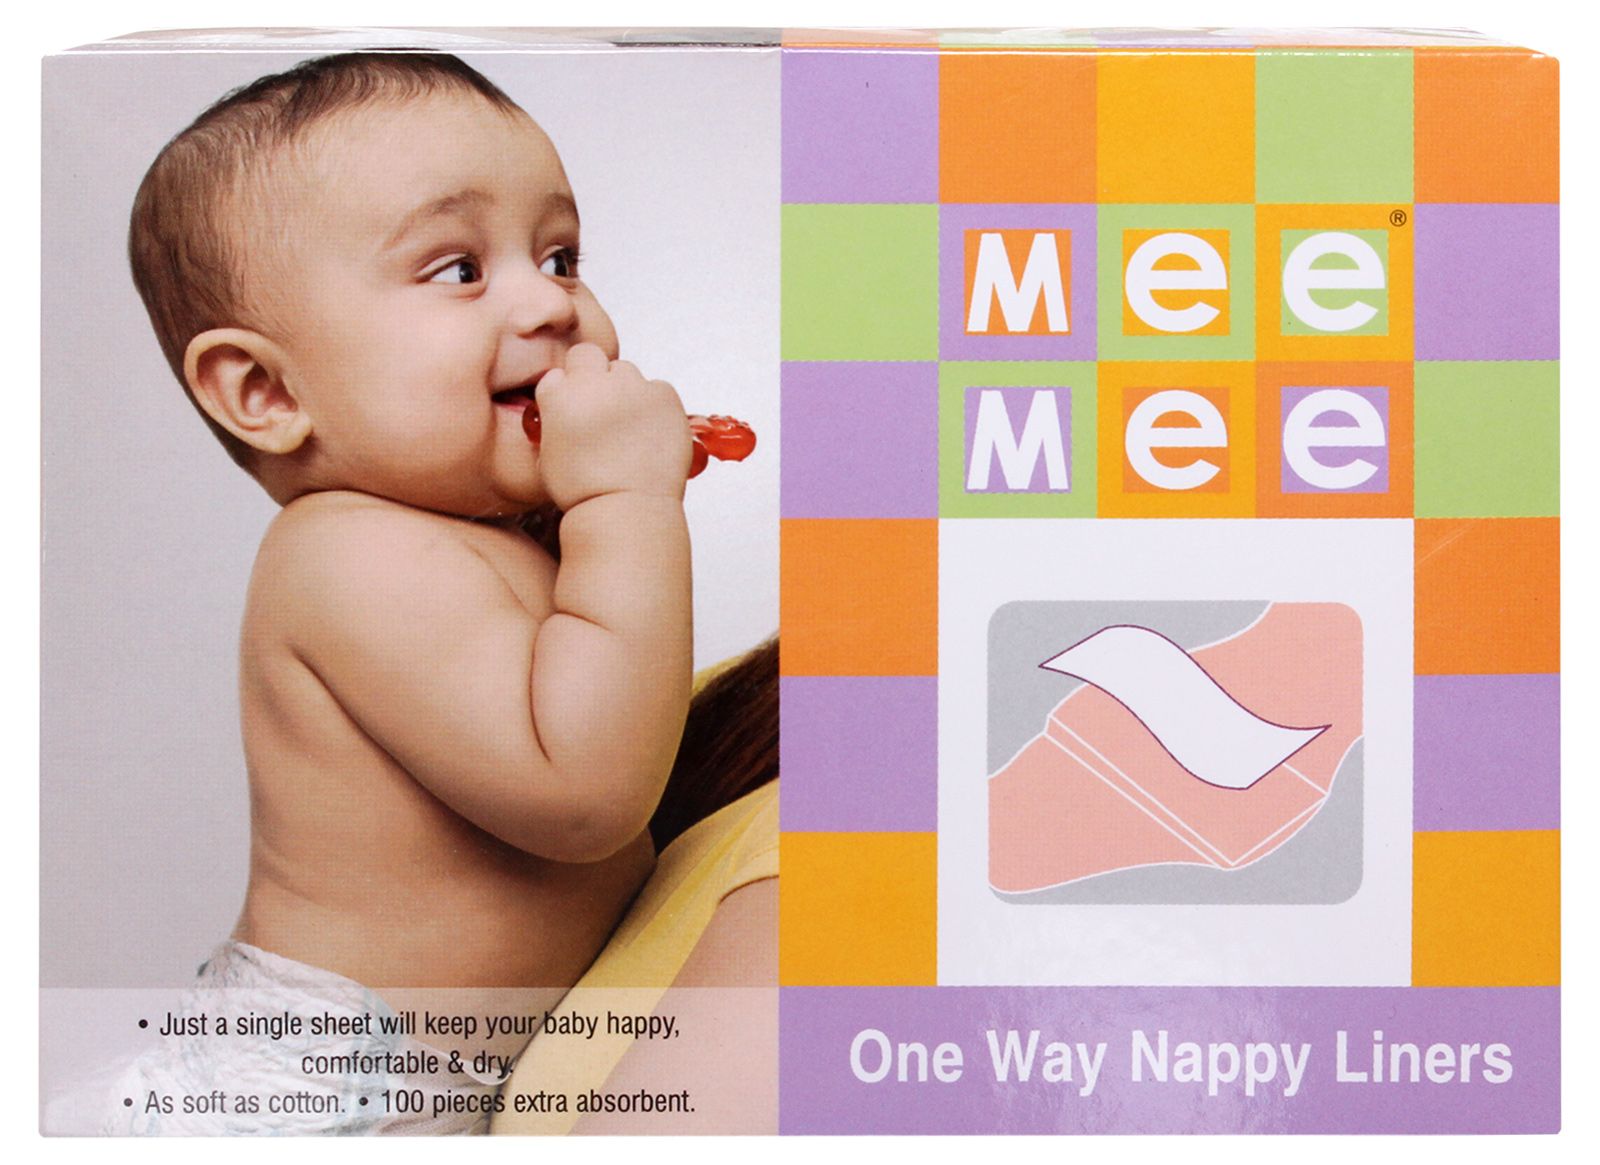 Mee Mee - Nappy Liners